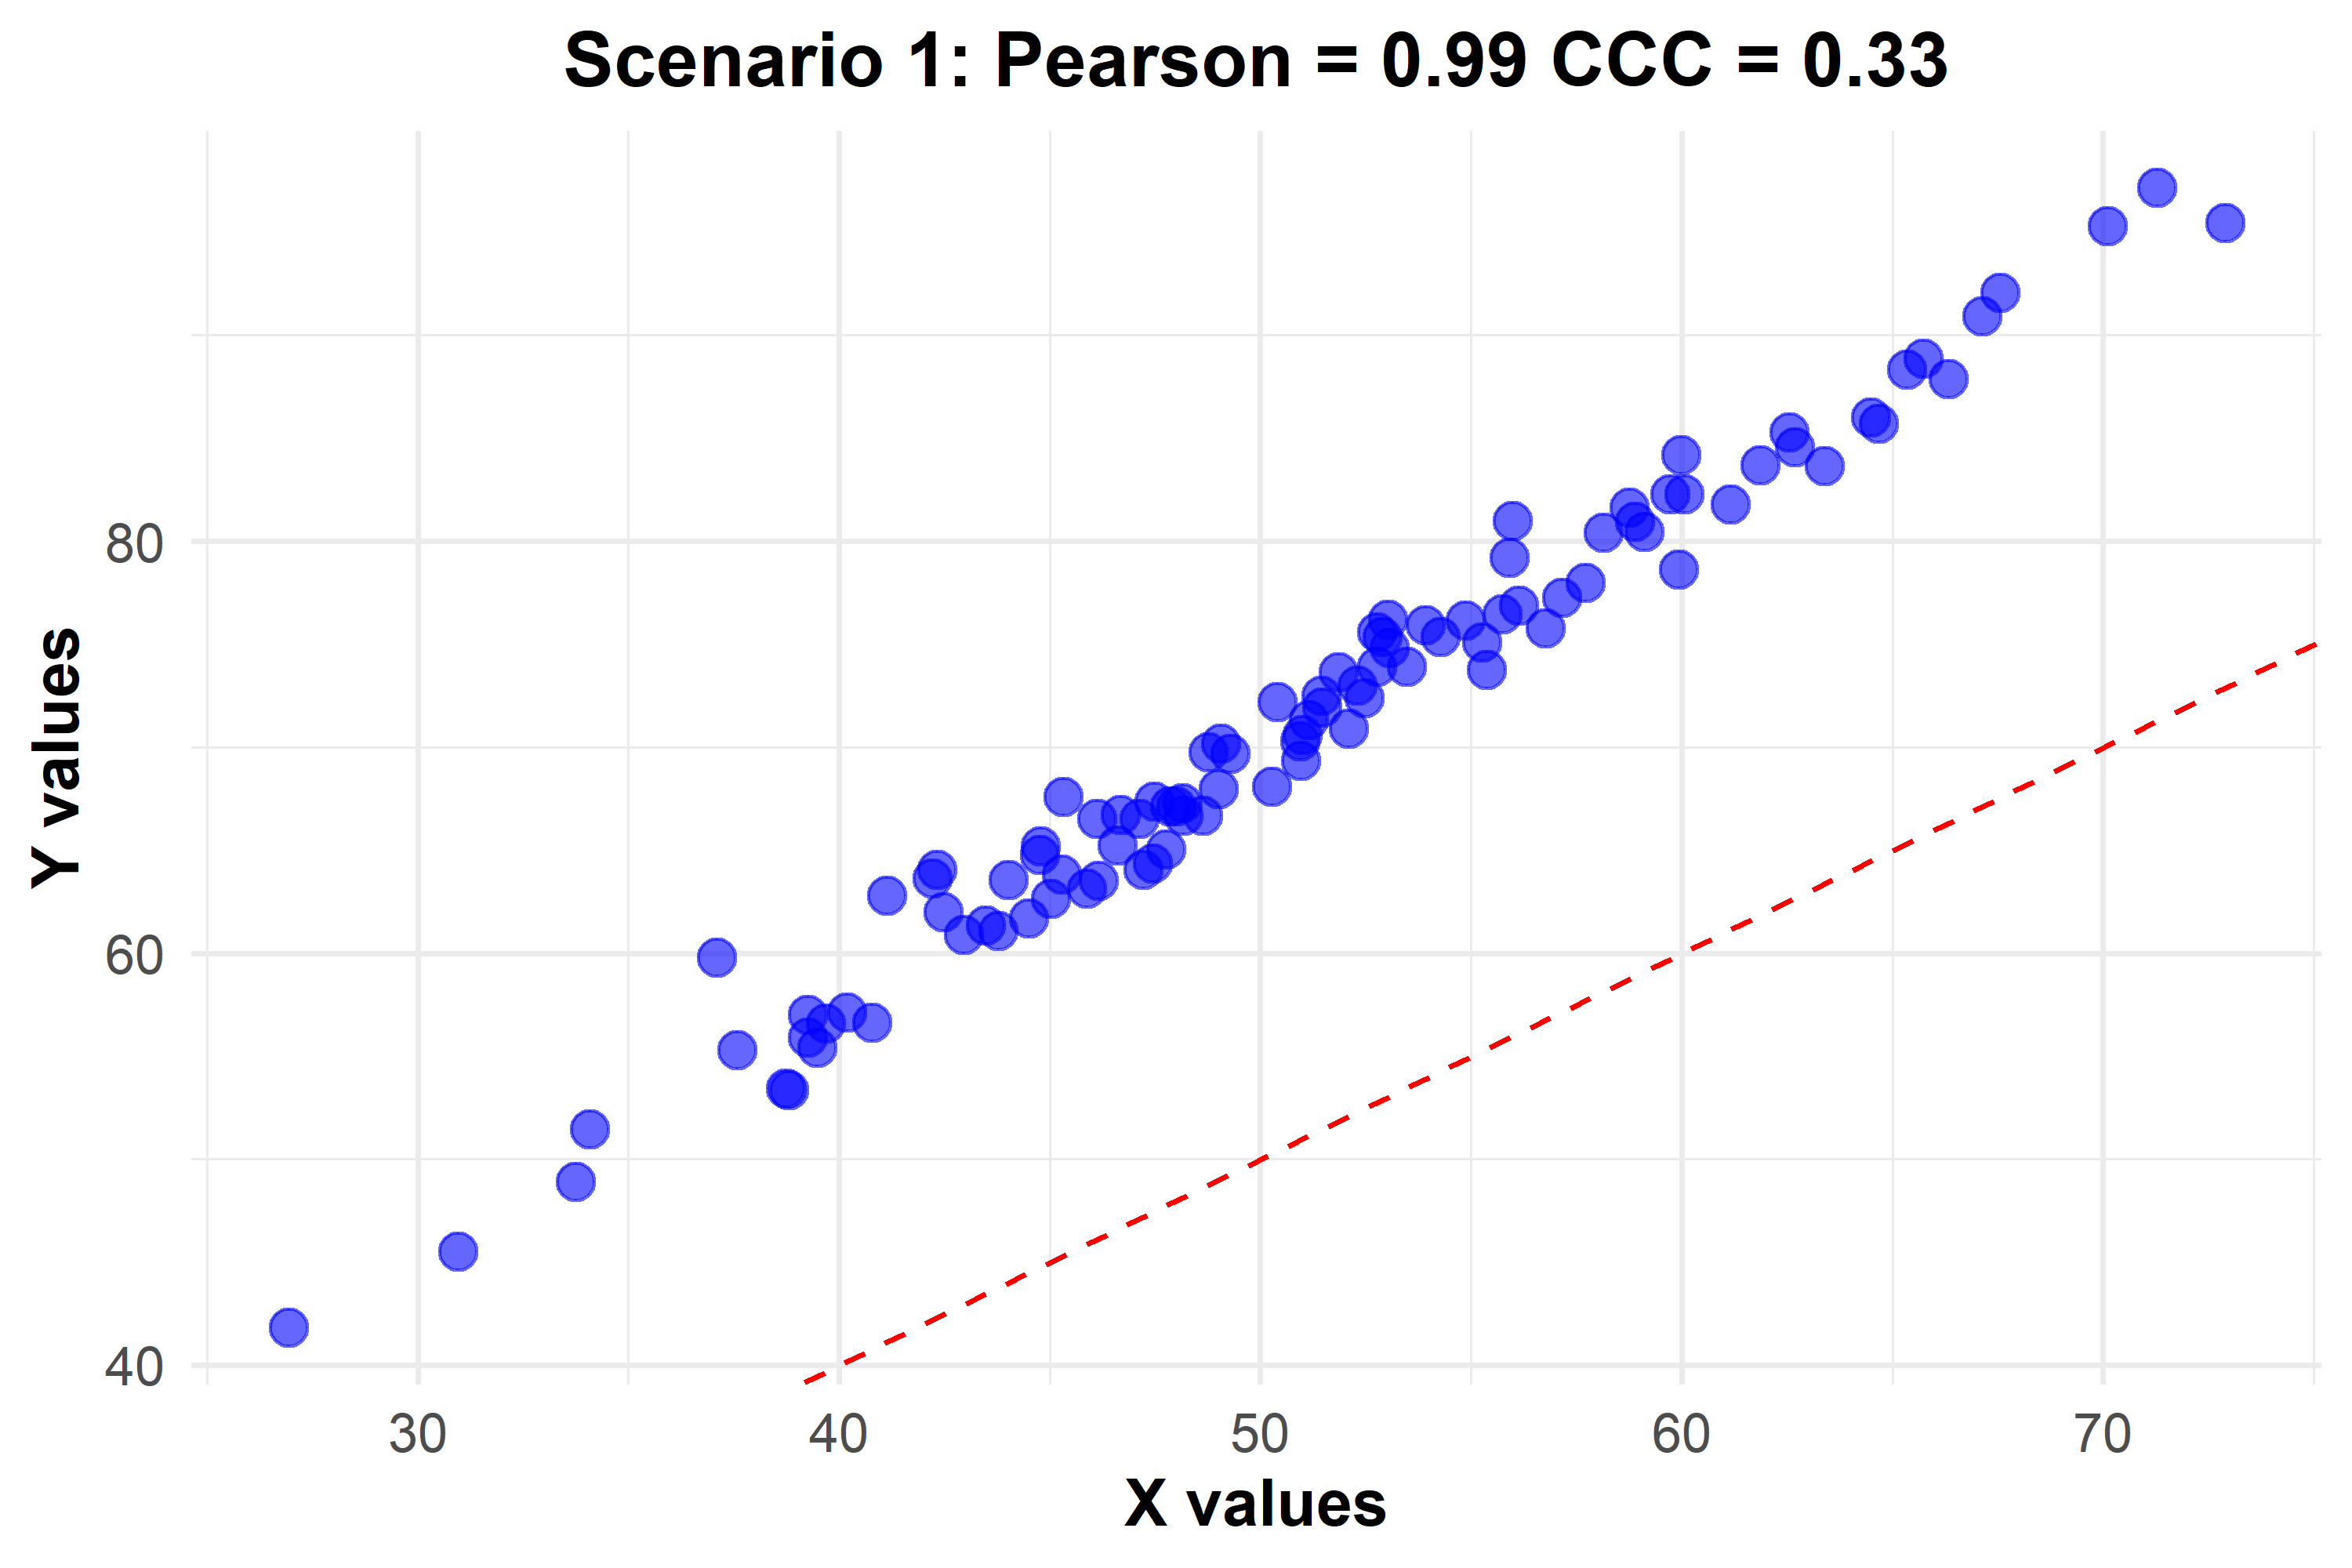 Scenario 1 - High Pearson correlation with modest CCC indicating possible systematic bias or scale differences. The dashed line represents perfect agreement